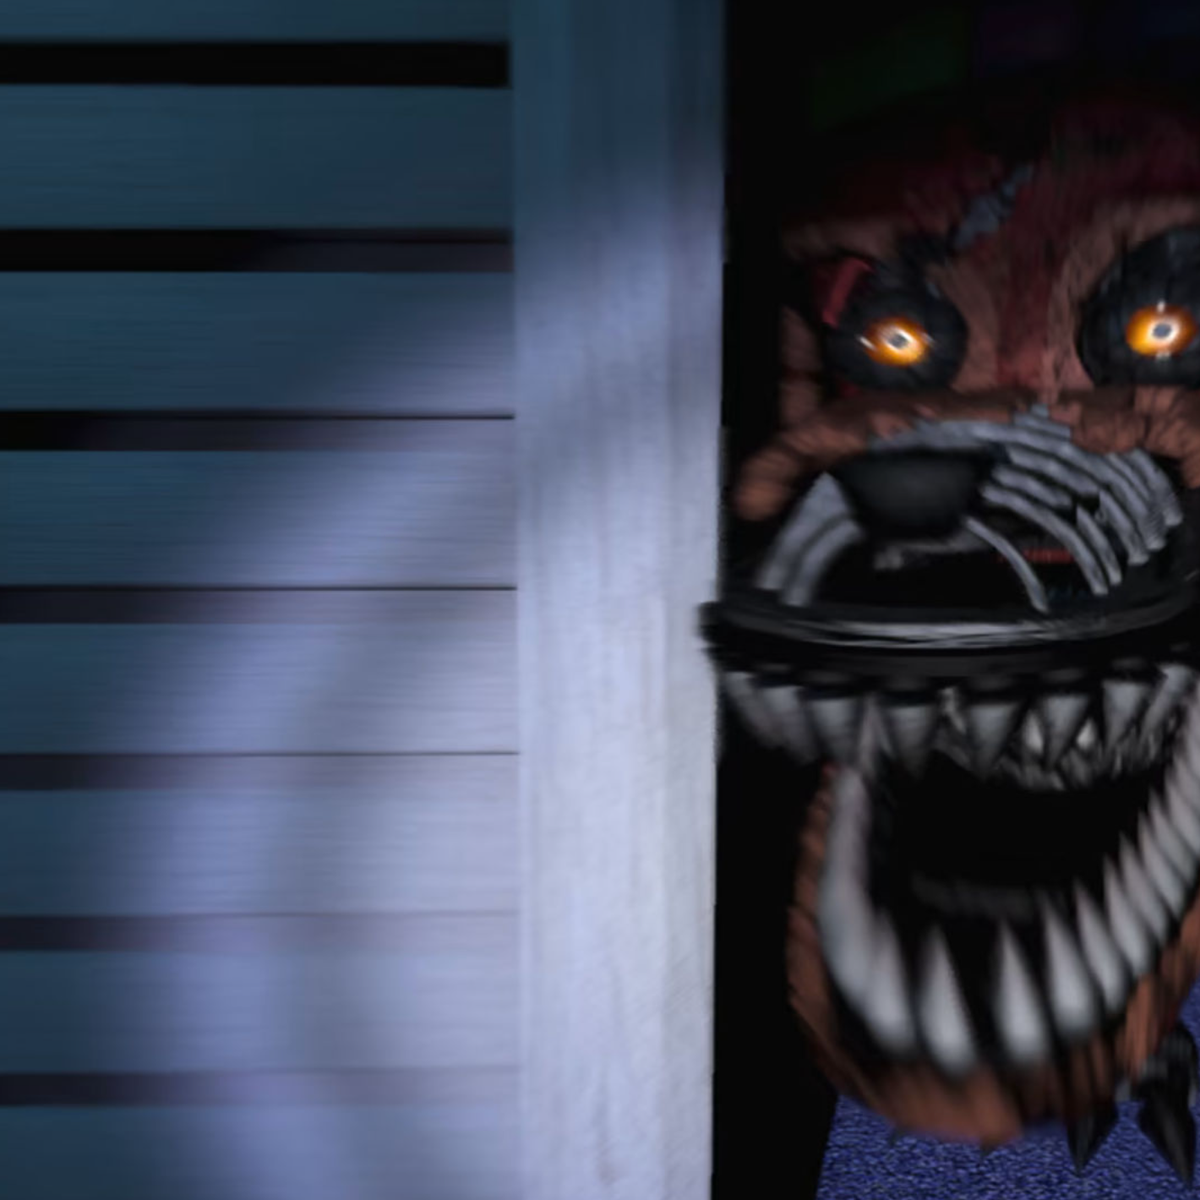 Five Nights at Freddy's quadrilogy lands on Xbox One